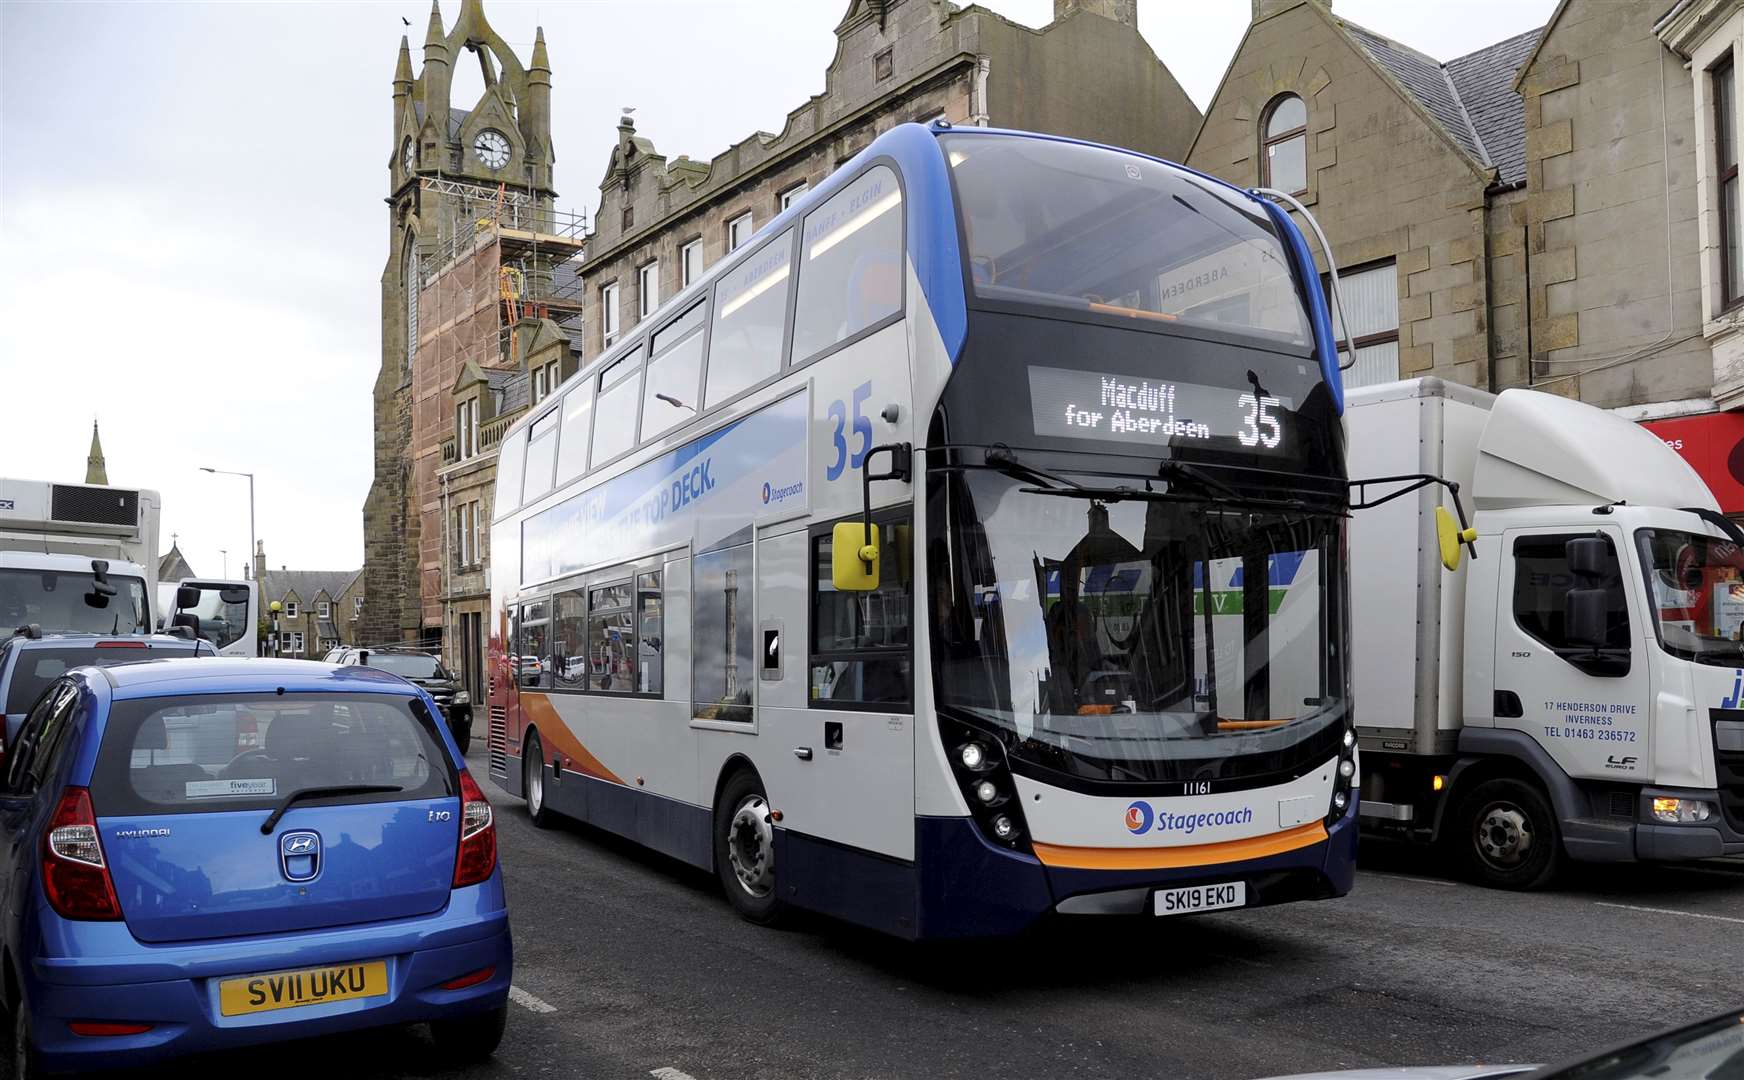 Stagecoach has revised its timetables.